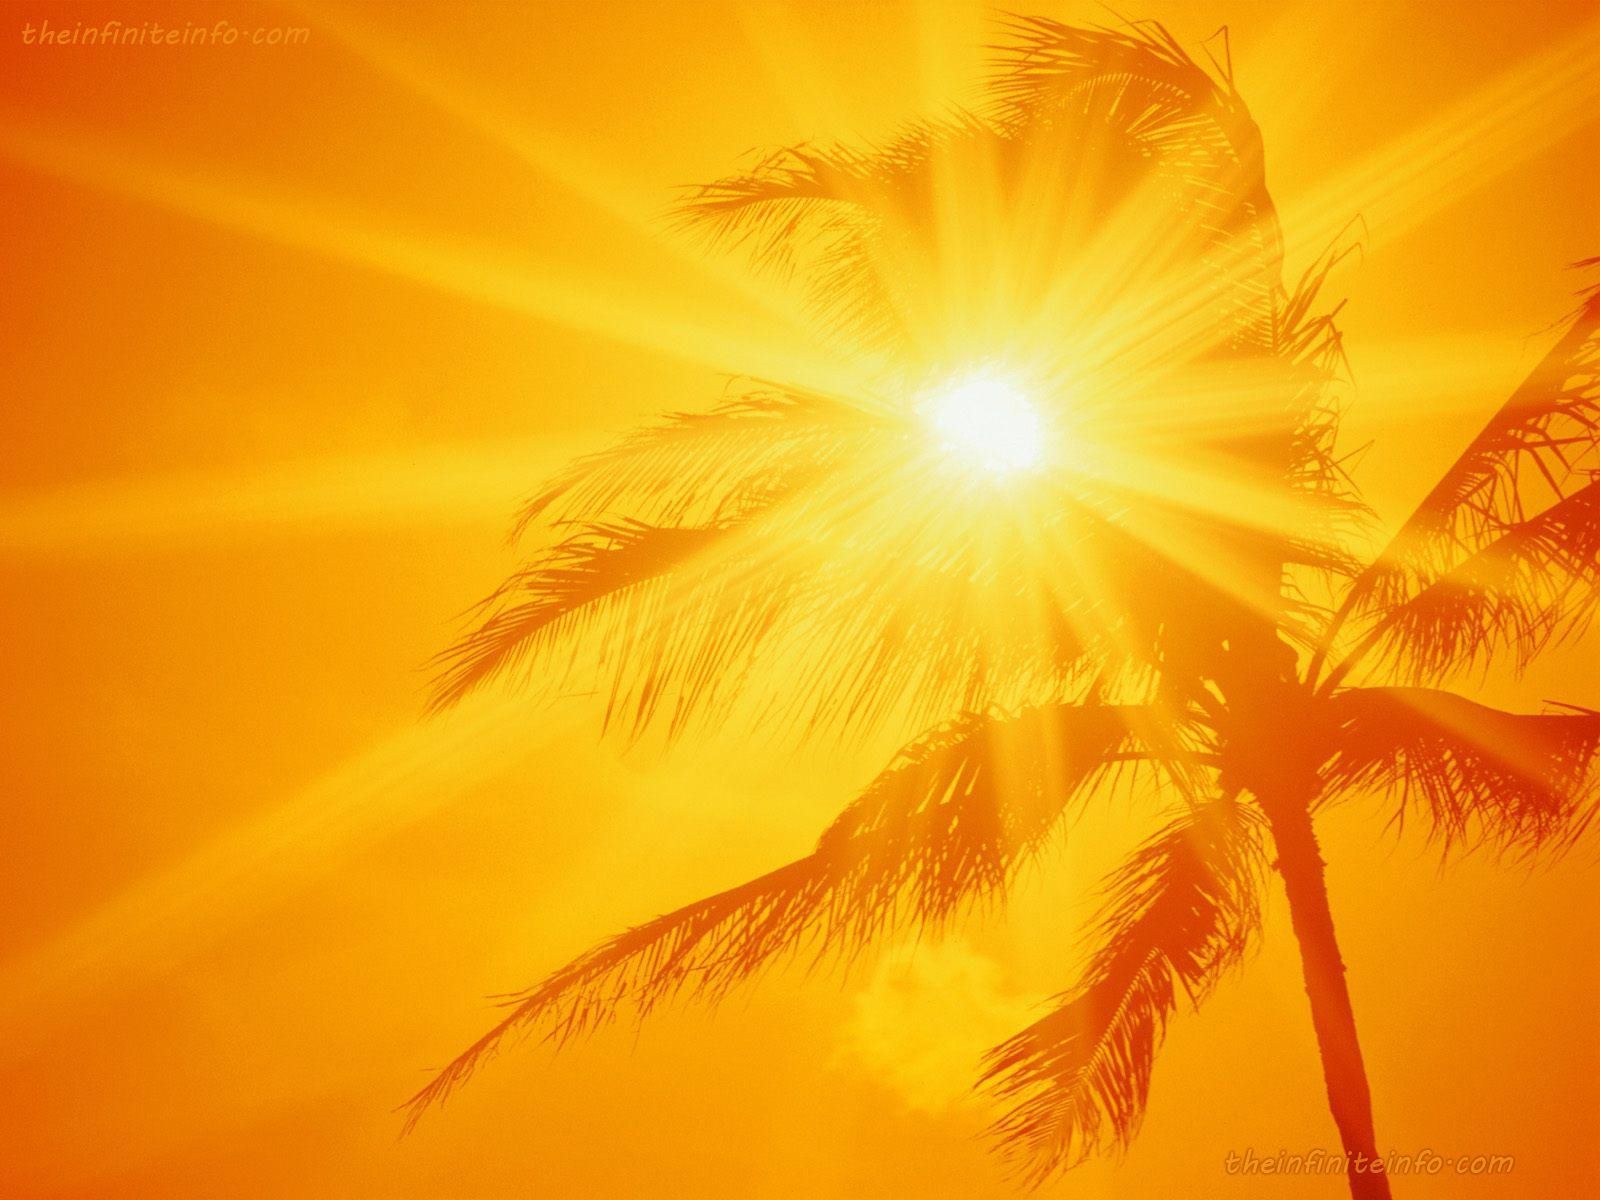 A palm tree in front of a yellow sky with the sun shining through the leaves. - Sunshine